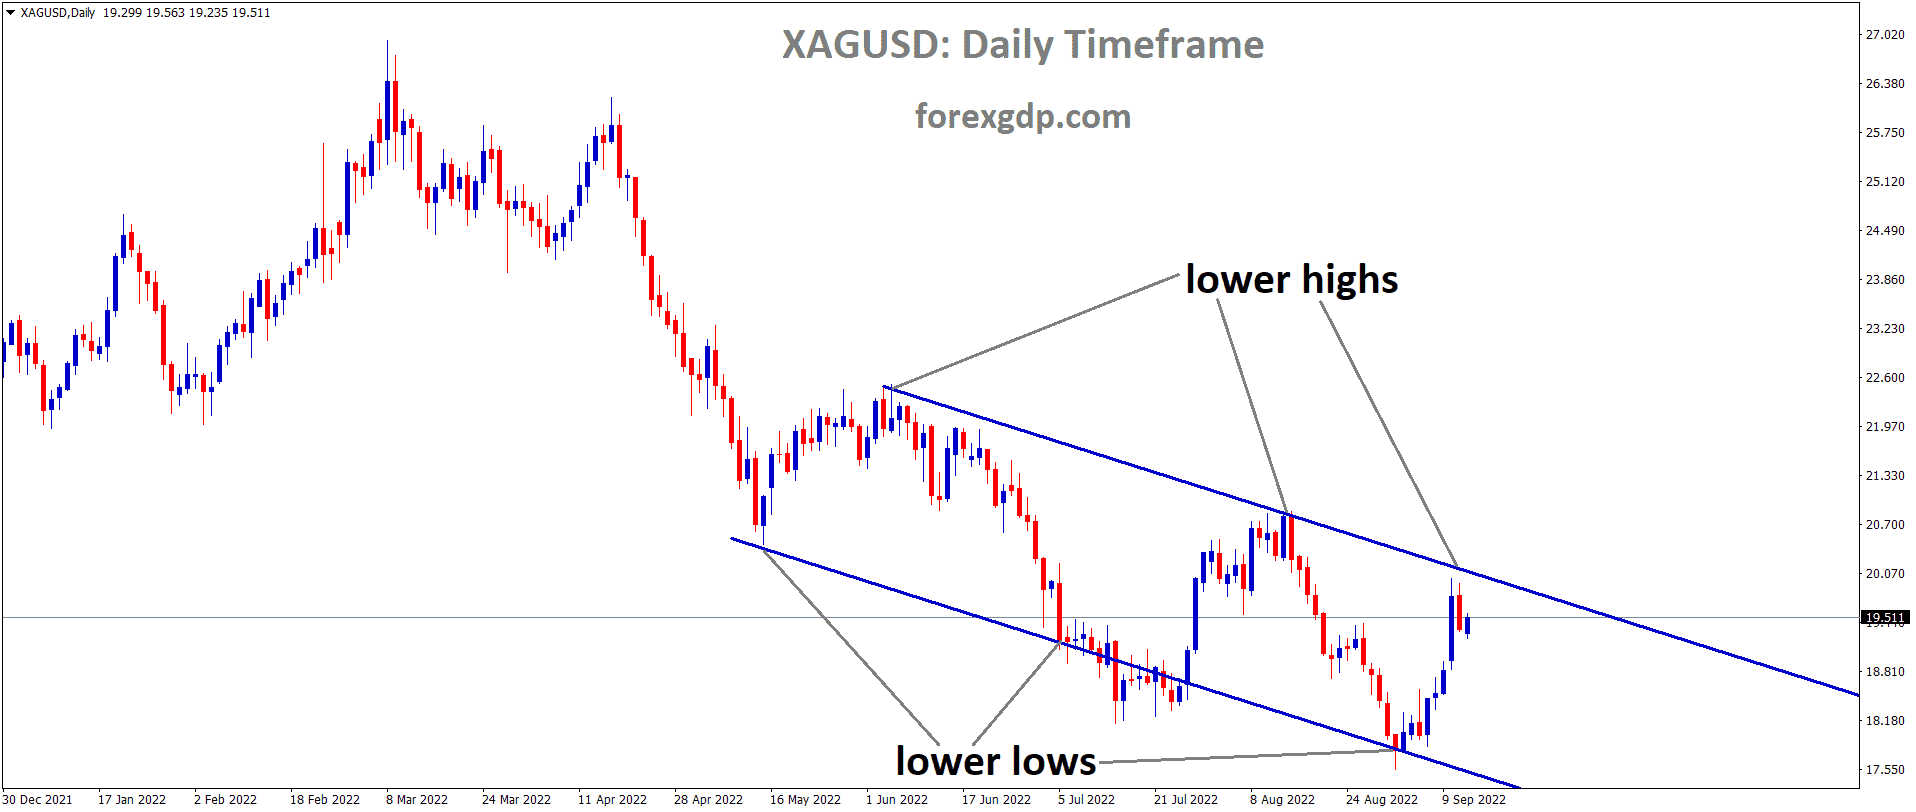 XAGUSD Silver price is moving in a Descending channel and the market has reached the Lower high area of the channel